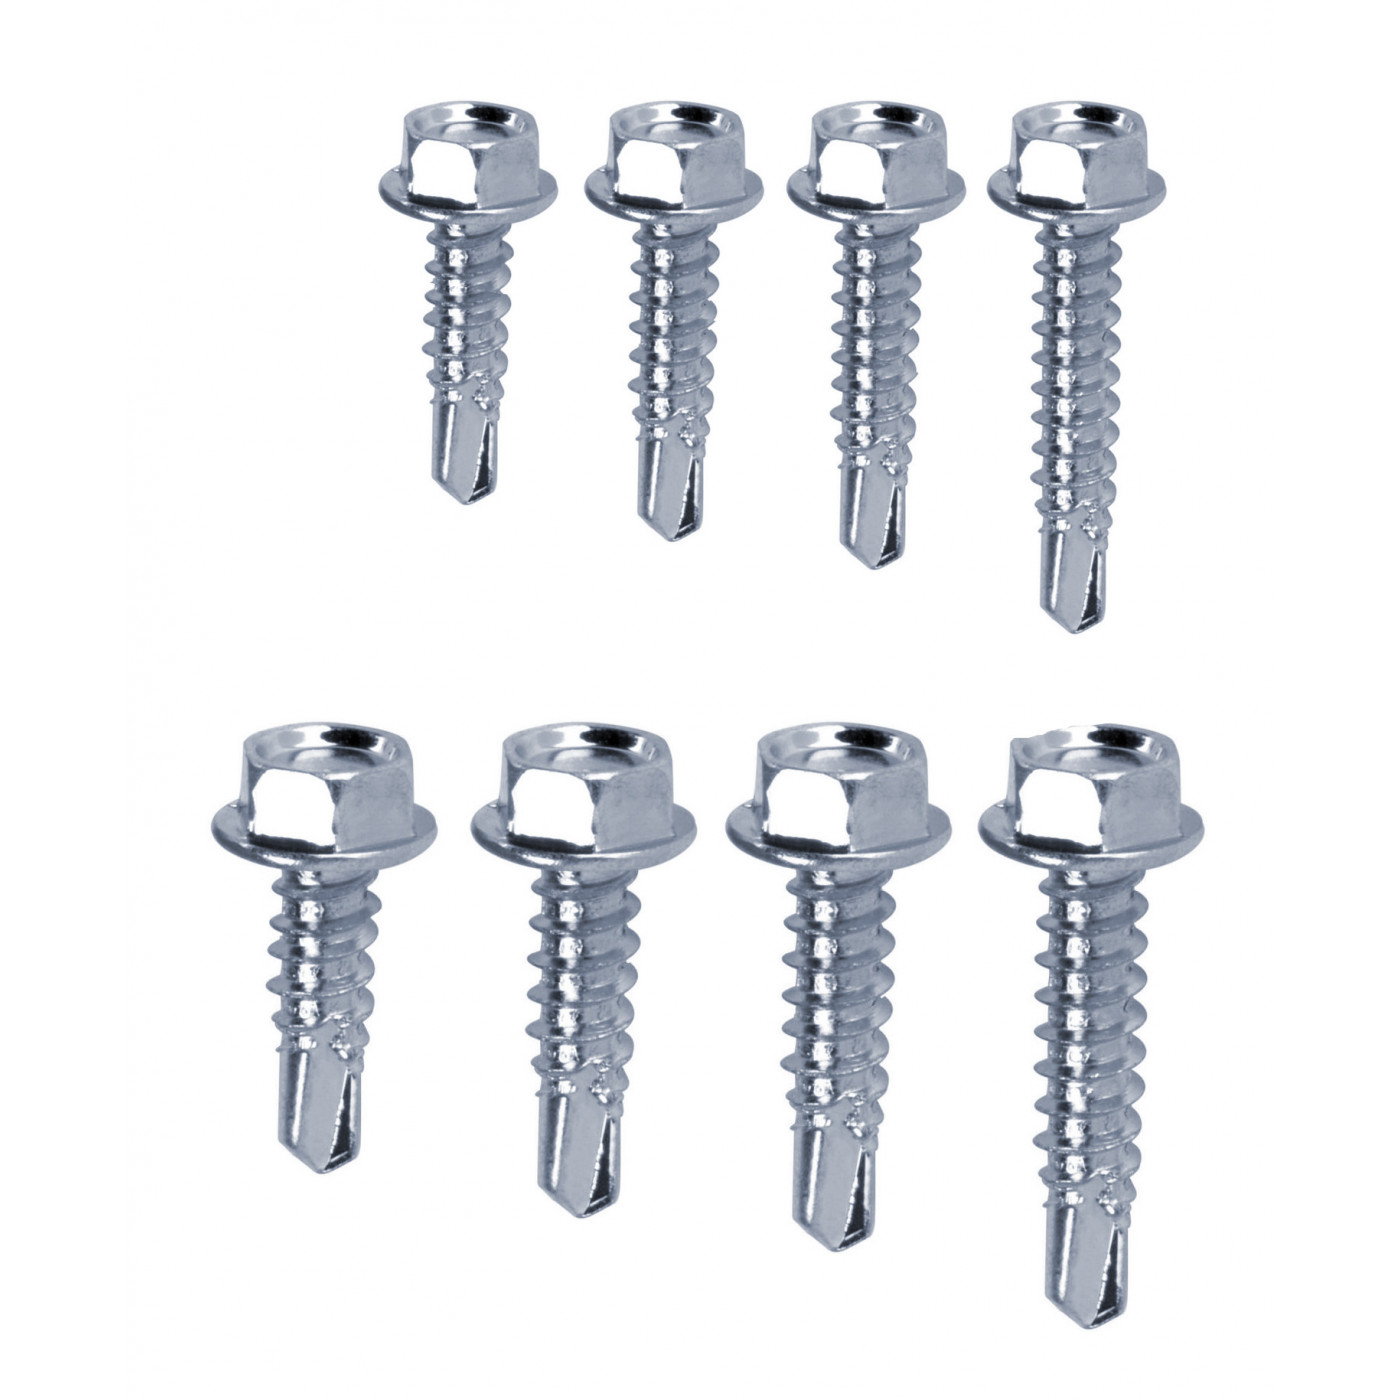 Set of 360 self tapping screws (hex washer head)